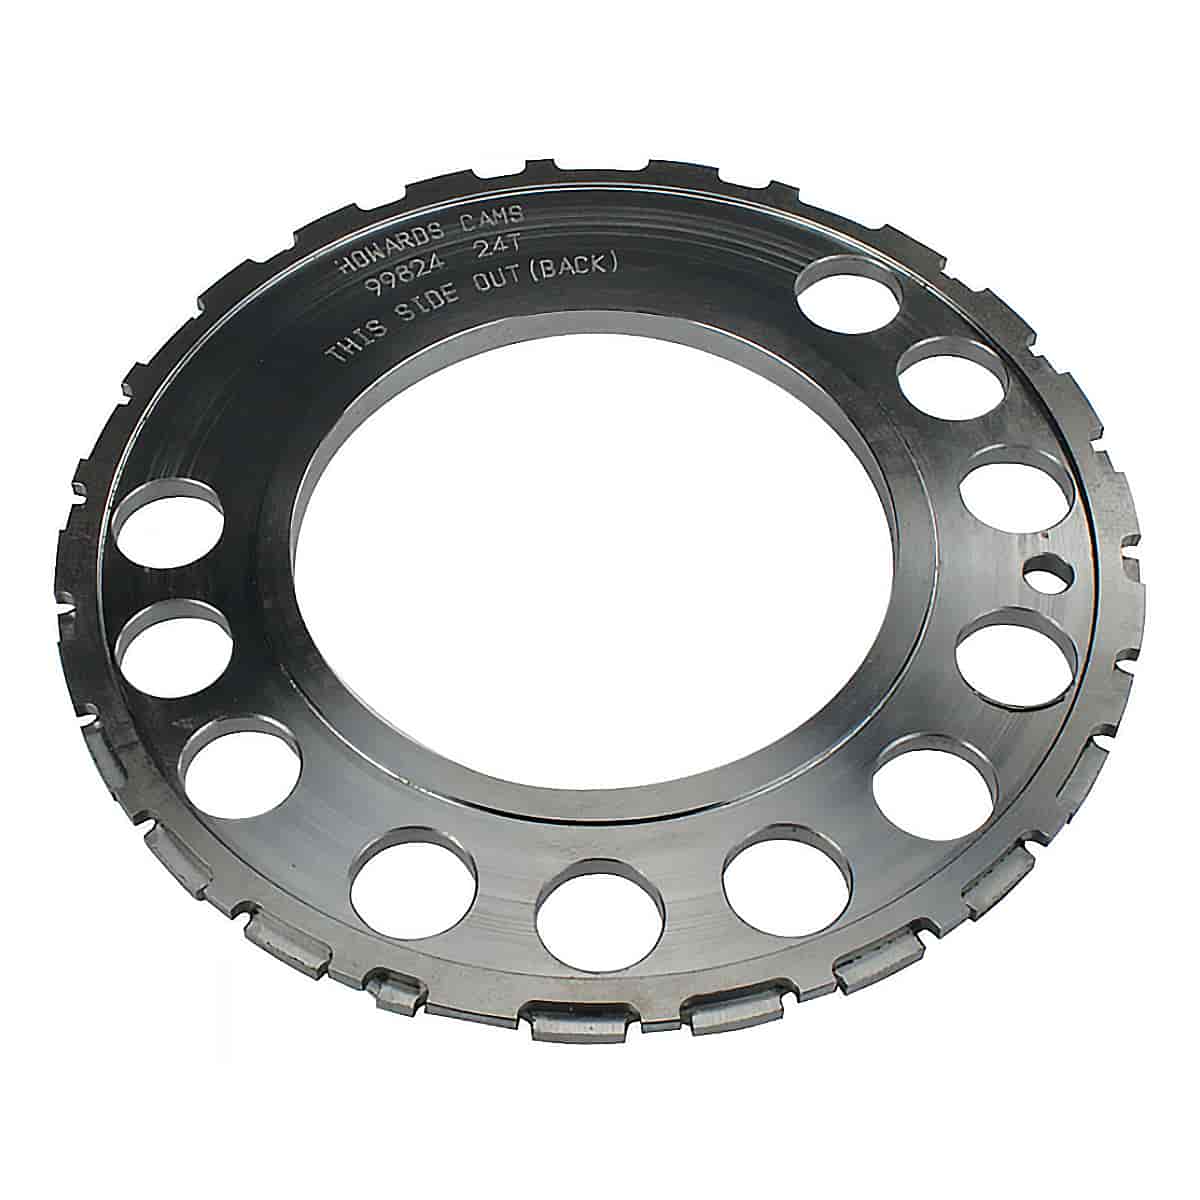 Billet Reluctor Wheel [24 Tooth]